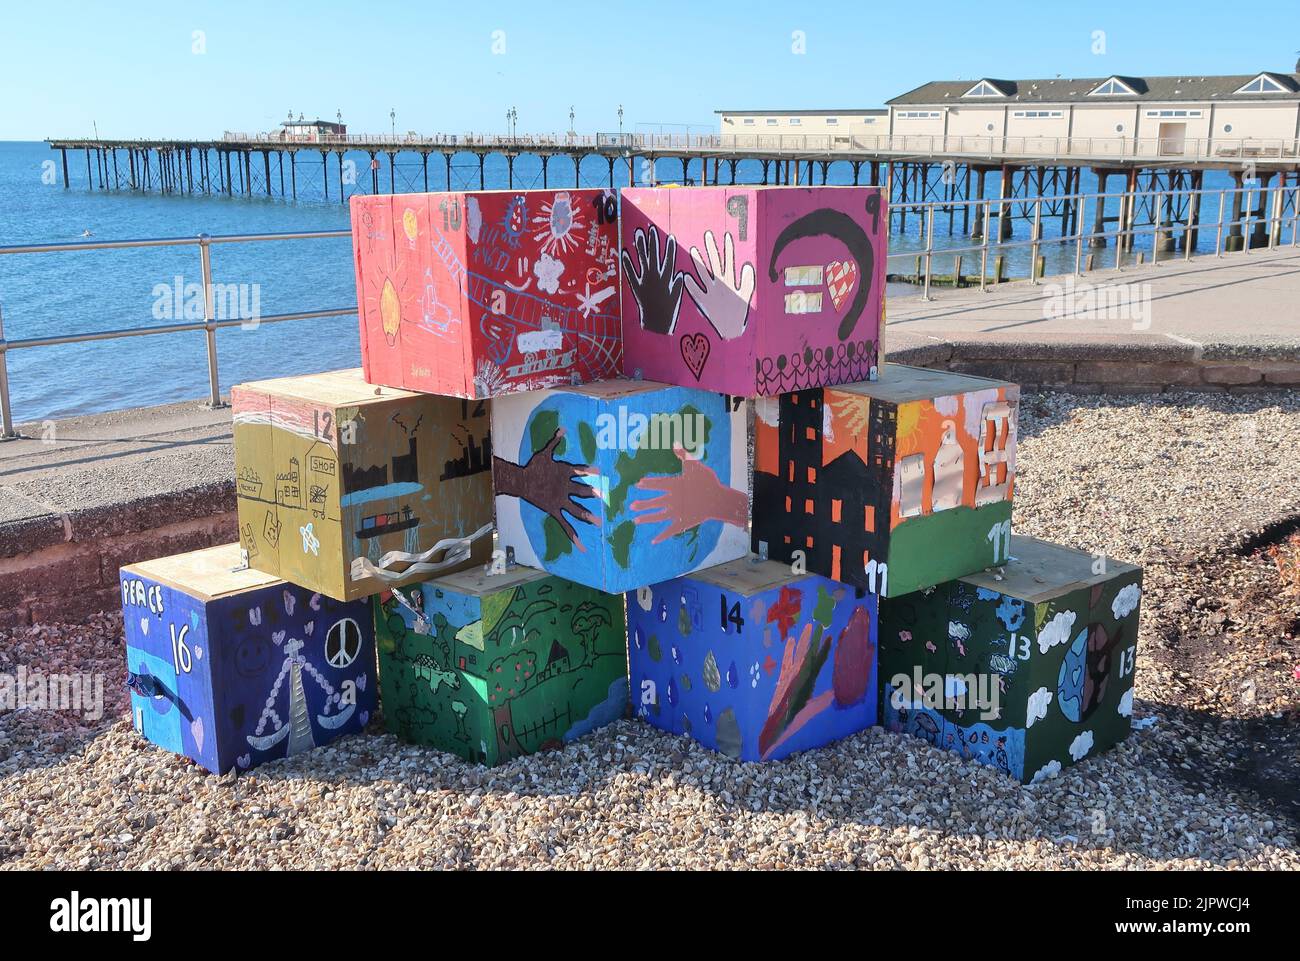 Recycled art along the seafront at Teignmouth, South Devon, using recycled materials to raise awareness of environmental issues. Stock Photo